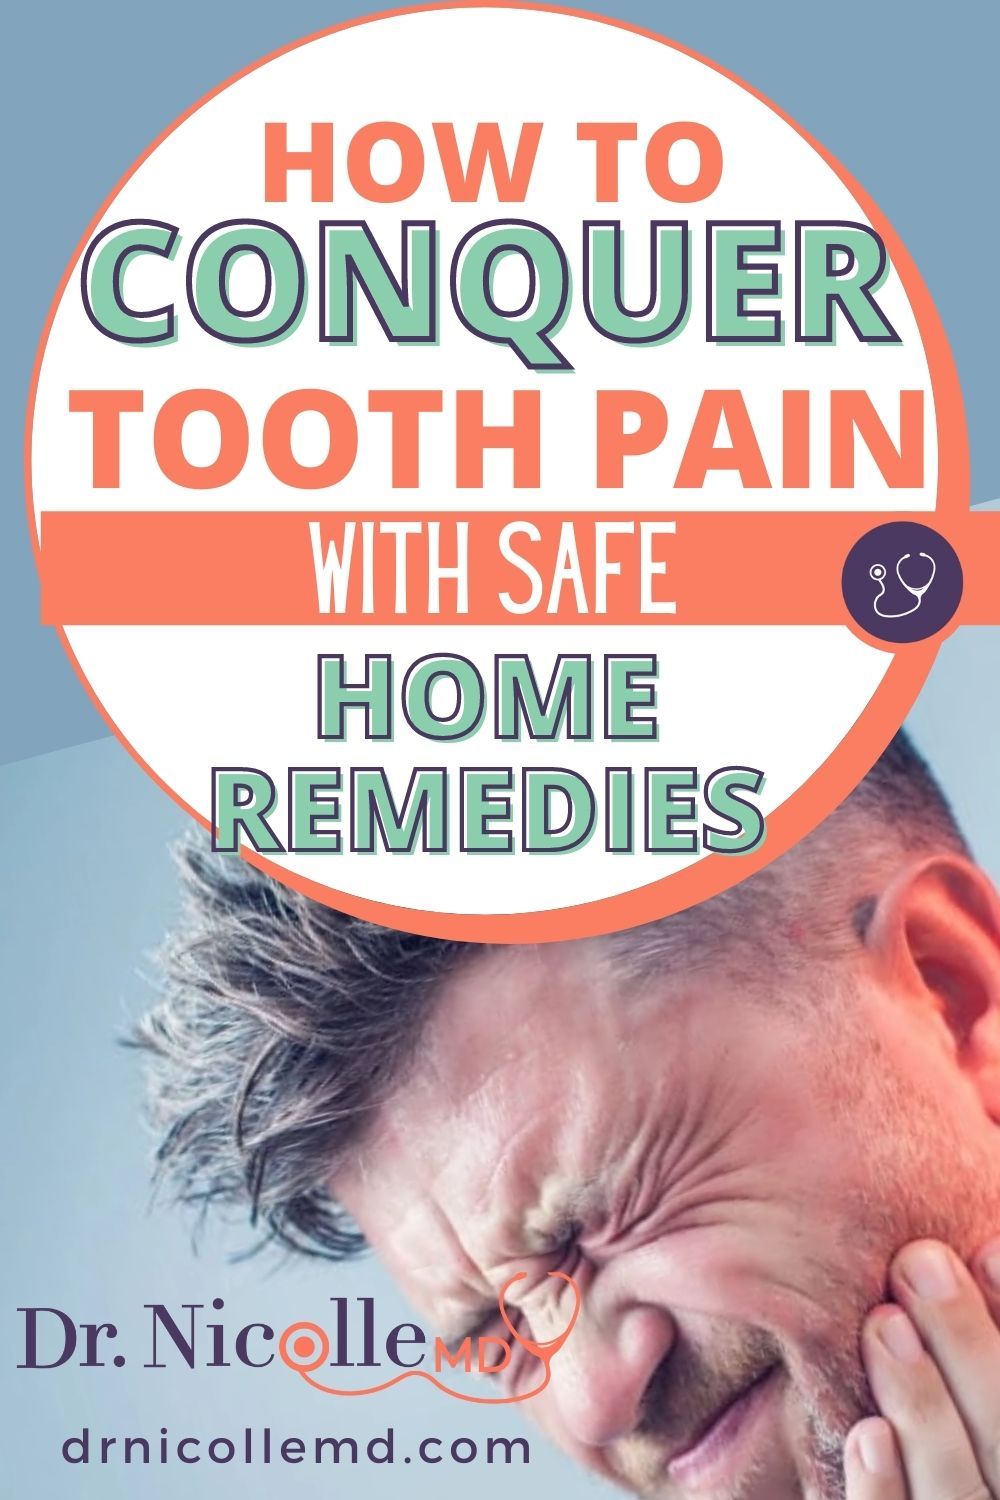 How To Conquer Tooth Pain With Safe Home Remedies